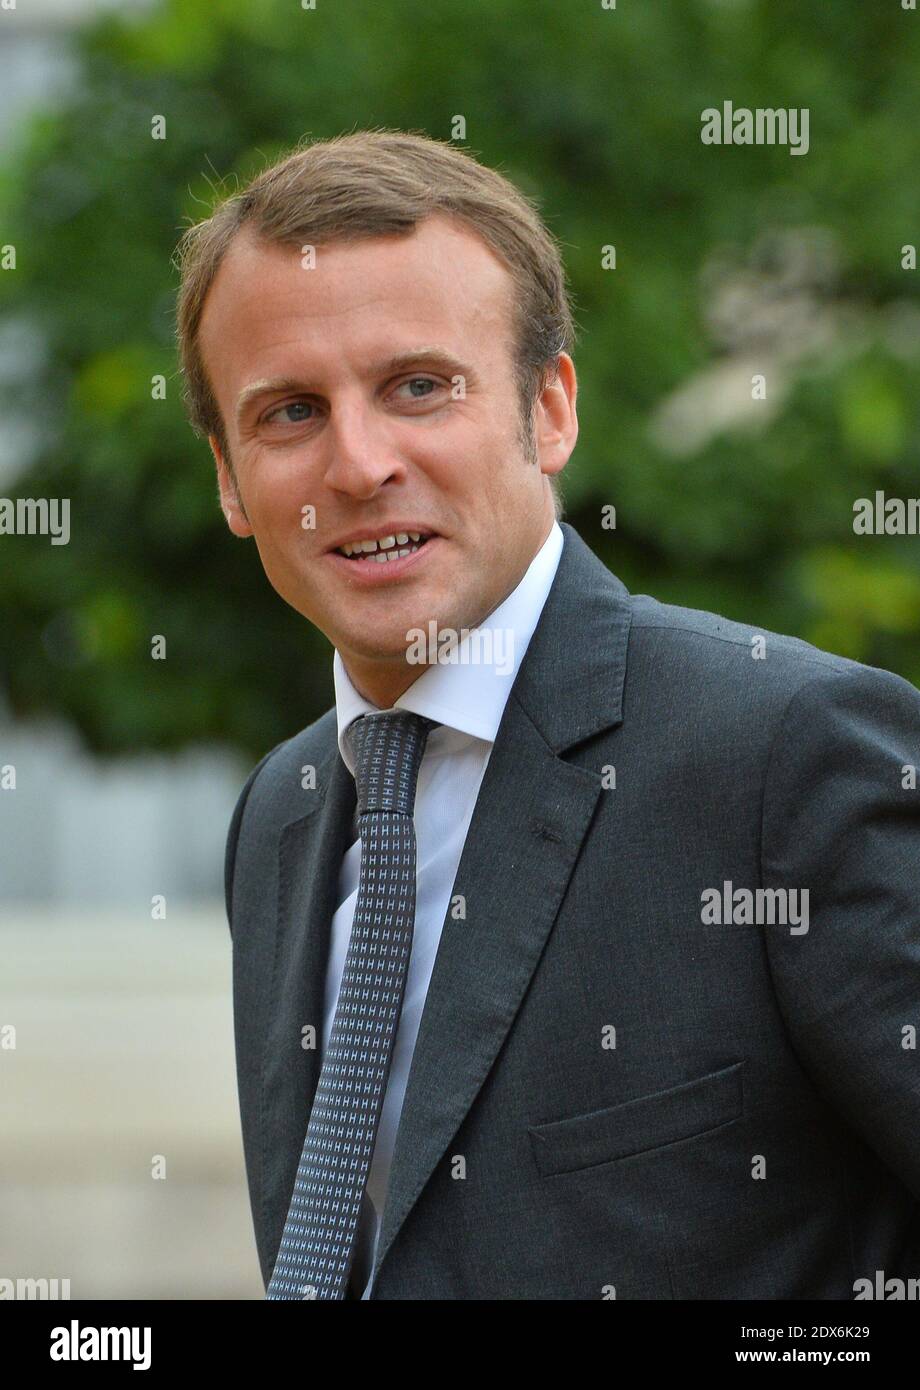 Newly-appointed Economy Minister Emmanuel Macron arriving at the Elysee presidential palace in Paris, France before a weekly cabinet meeting. French President Francois Hollande on August 27 installed a former banker and ally as economy minister in an emergency reshuffle seen as the 'last chance' to haul France out of the biggest crisis of his presidency. Hollande caught everyone off guard with the appointment of Emmanuel Macron, a 36-year-old ex-Rothschild banker and architect of the president's economic policy. Photo by Christian Liewig/ABACAPRESS.COM Stock Photo